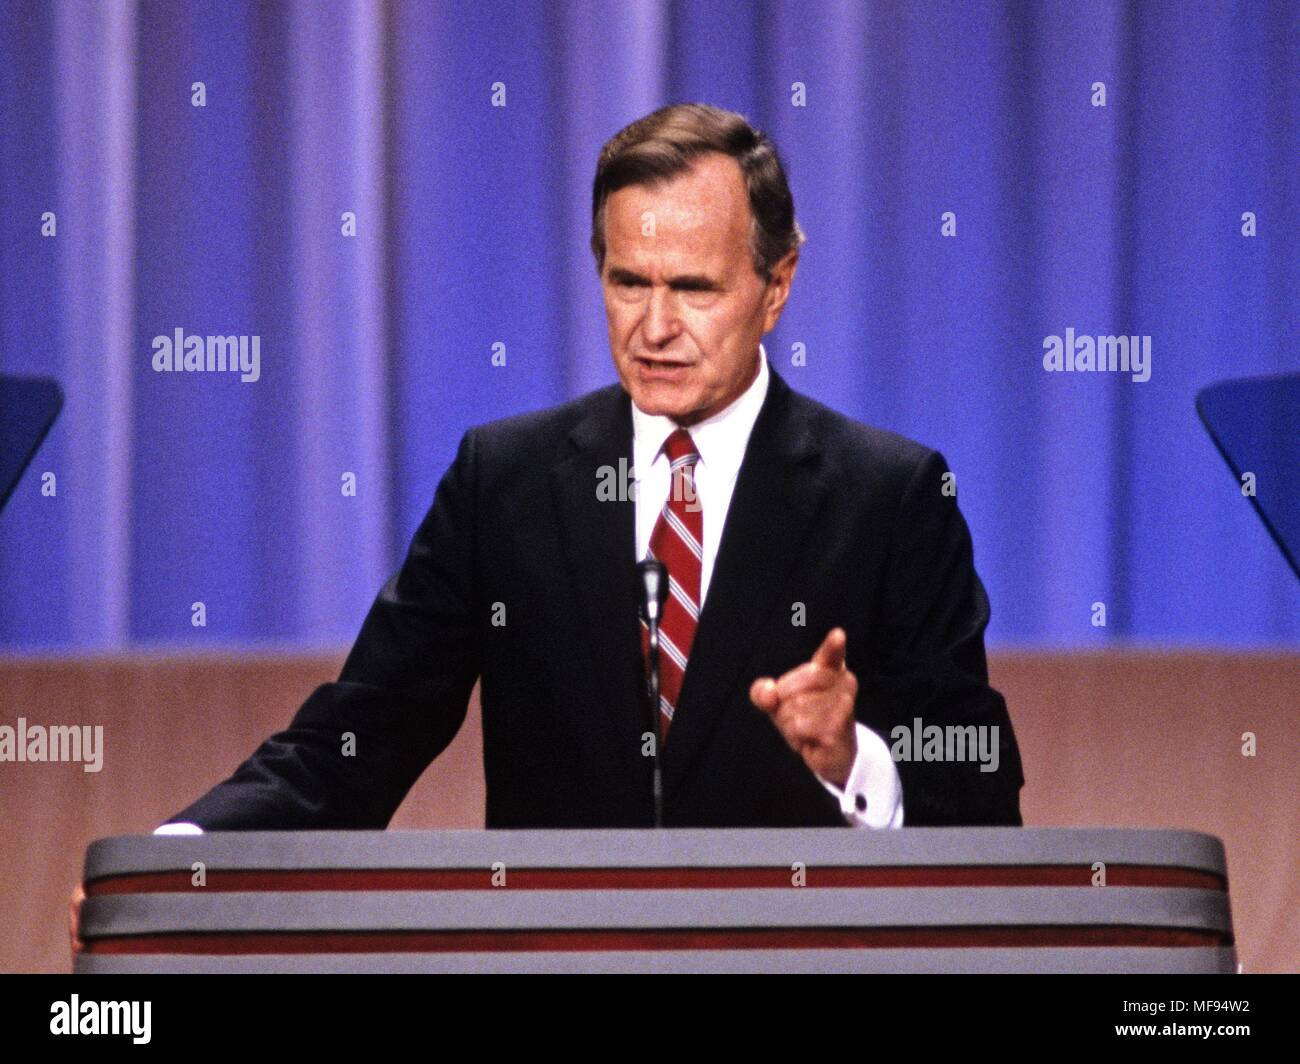 New Orleans, Louisiana, USA. 18th Aug, 1988. United States Vice President GEORGE H.W. BUSH waves to the crowd from the podium as he delivers his speech accepting his party's nomination for President of the United States at the 1988 Republican Convention at the Super Dome in New Orleans, Louisiana in 1988. Credit: Arnie Sachs/CNP/ZUMAPRESS.com/Alamy Live News Stock Photo